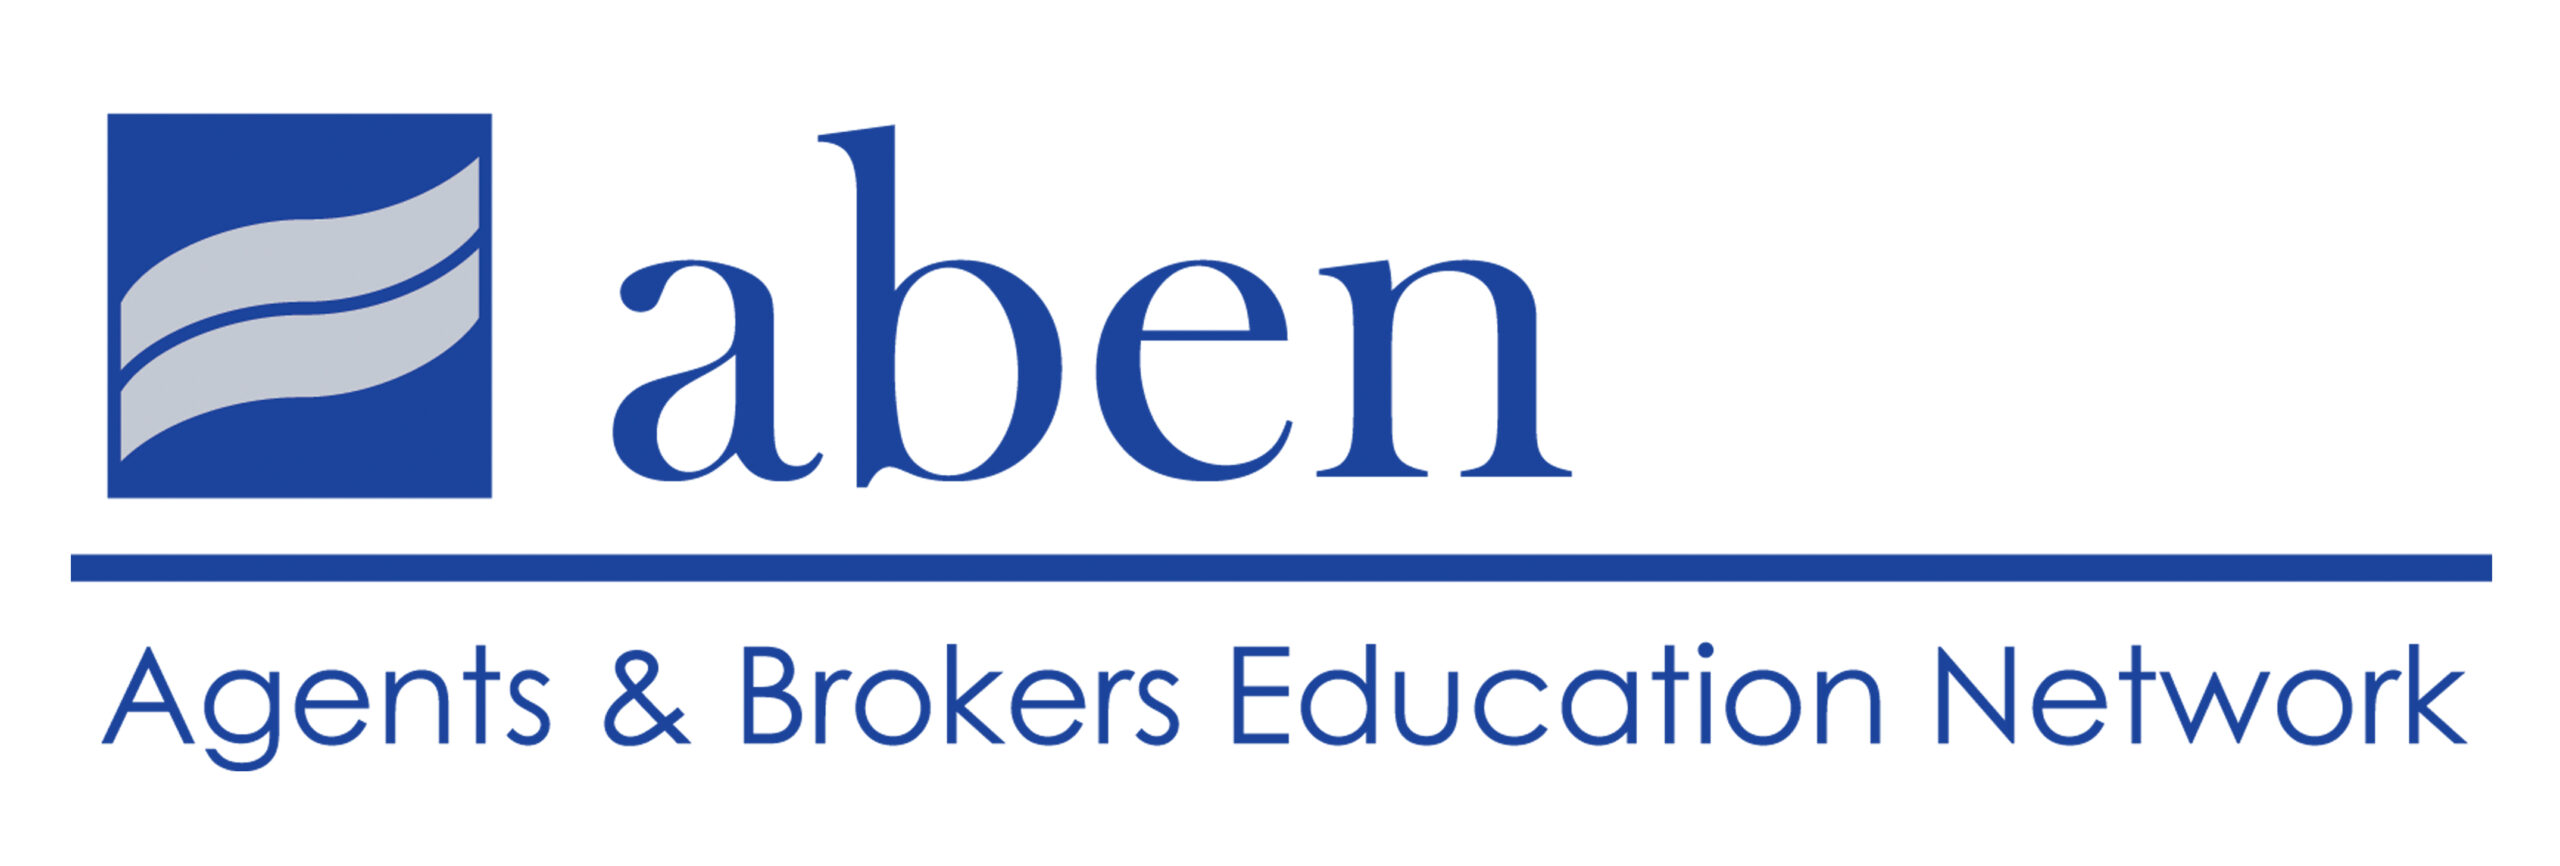 ABEN: the Agents & Brokers Education Network